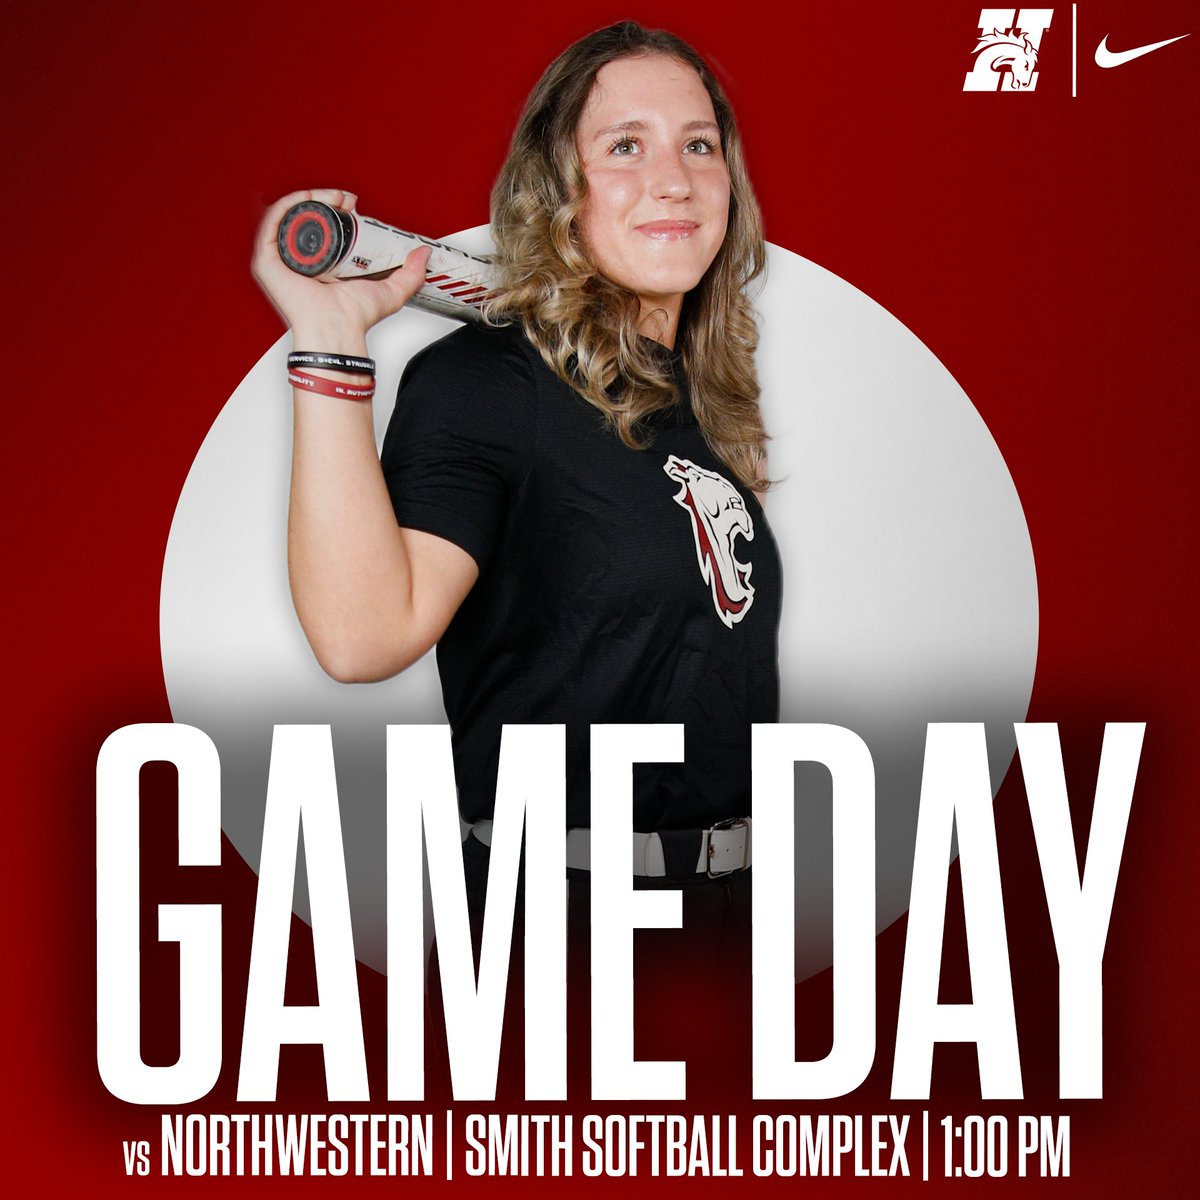 IT'S GAME DAY!! We are back at Smith Softball Complex at 1:00 PM for another doubleheader! 🎟️: hastingsbroncos.com/links/trnrw1 📺: hastingsbroncos.com/links/xakh10 📊: hastingsbroncos.com/sports/sball/2… #GDTBAB